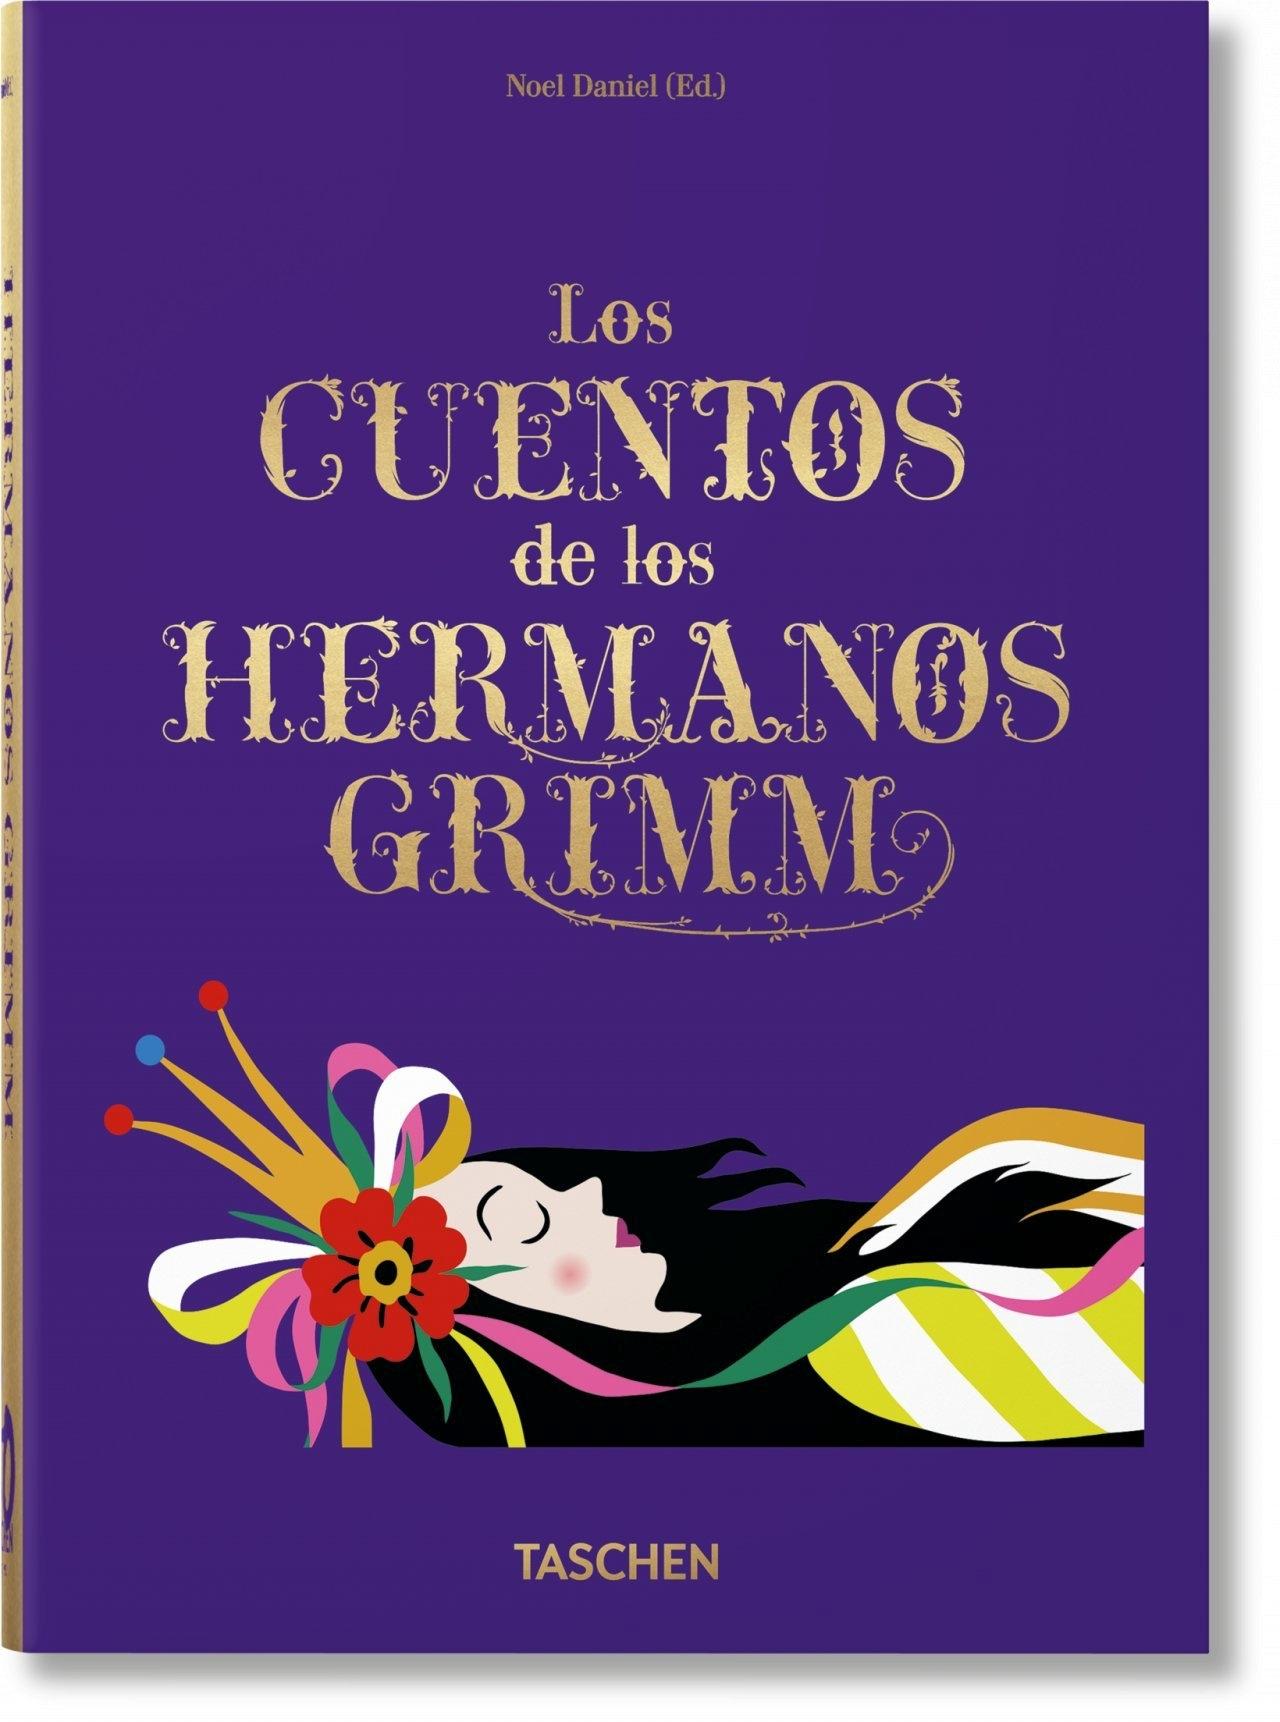 FAIRY TALES. GRIMM & ANDERSEN. 2 IN 1. 40TH ANNIVERSARY EDITION